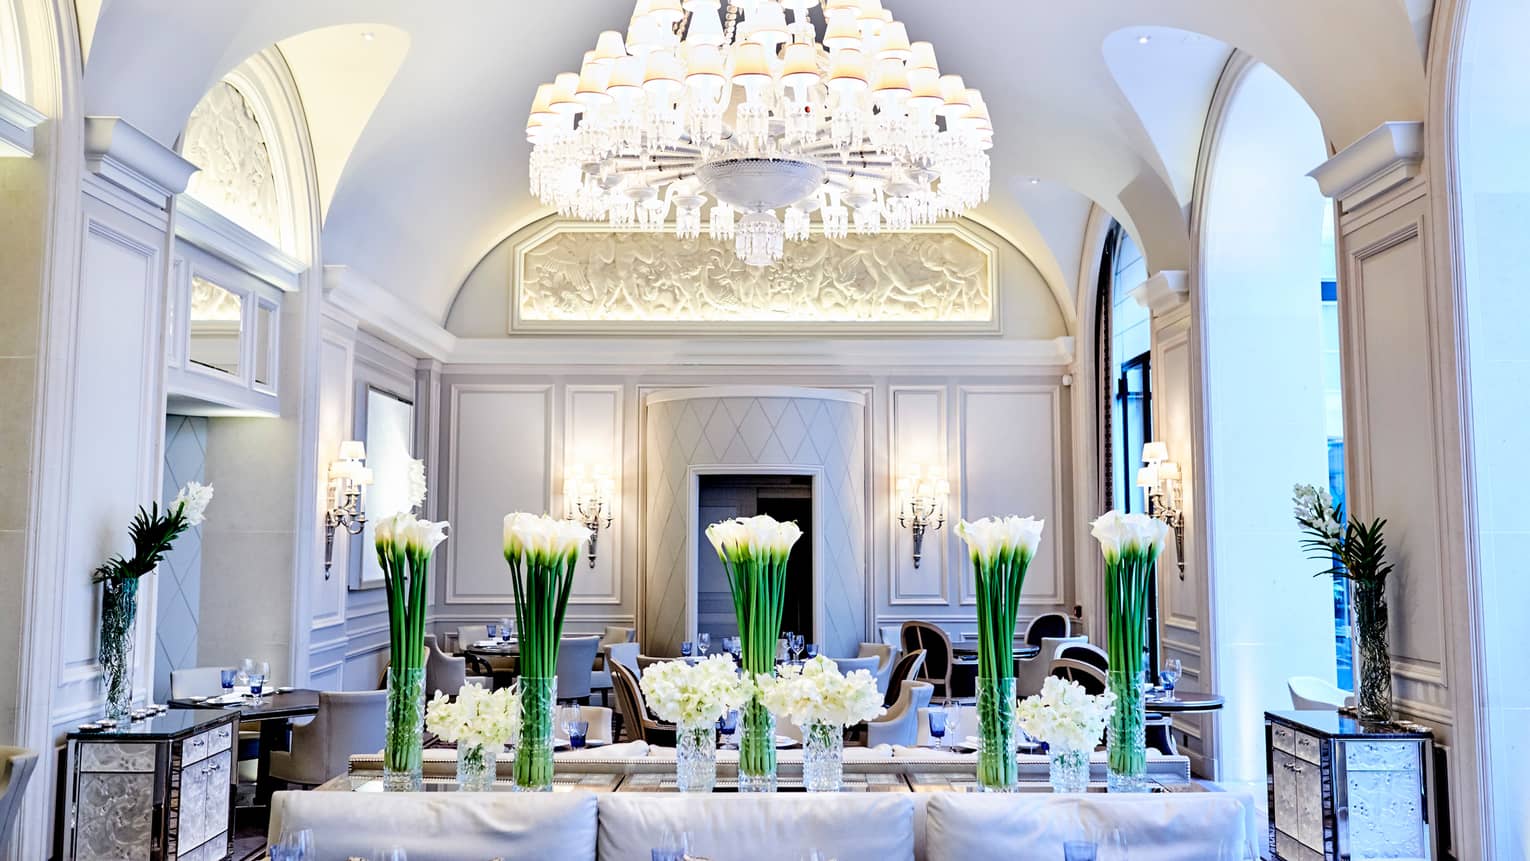 Le George dining room, white flowers in vases under large crystal chandelier